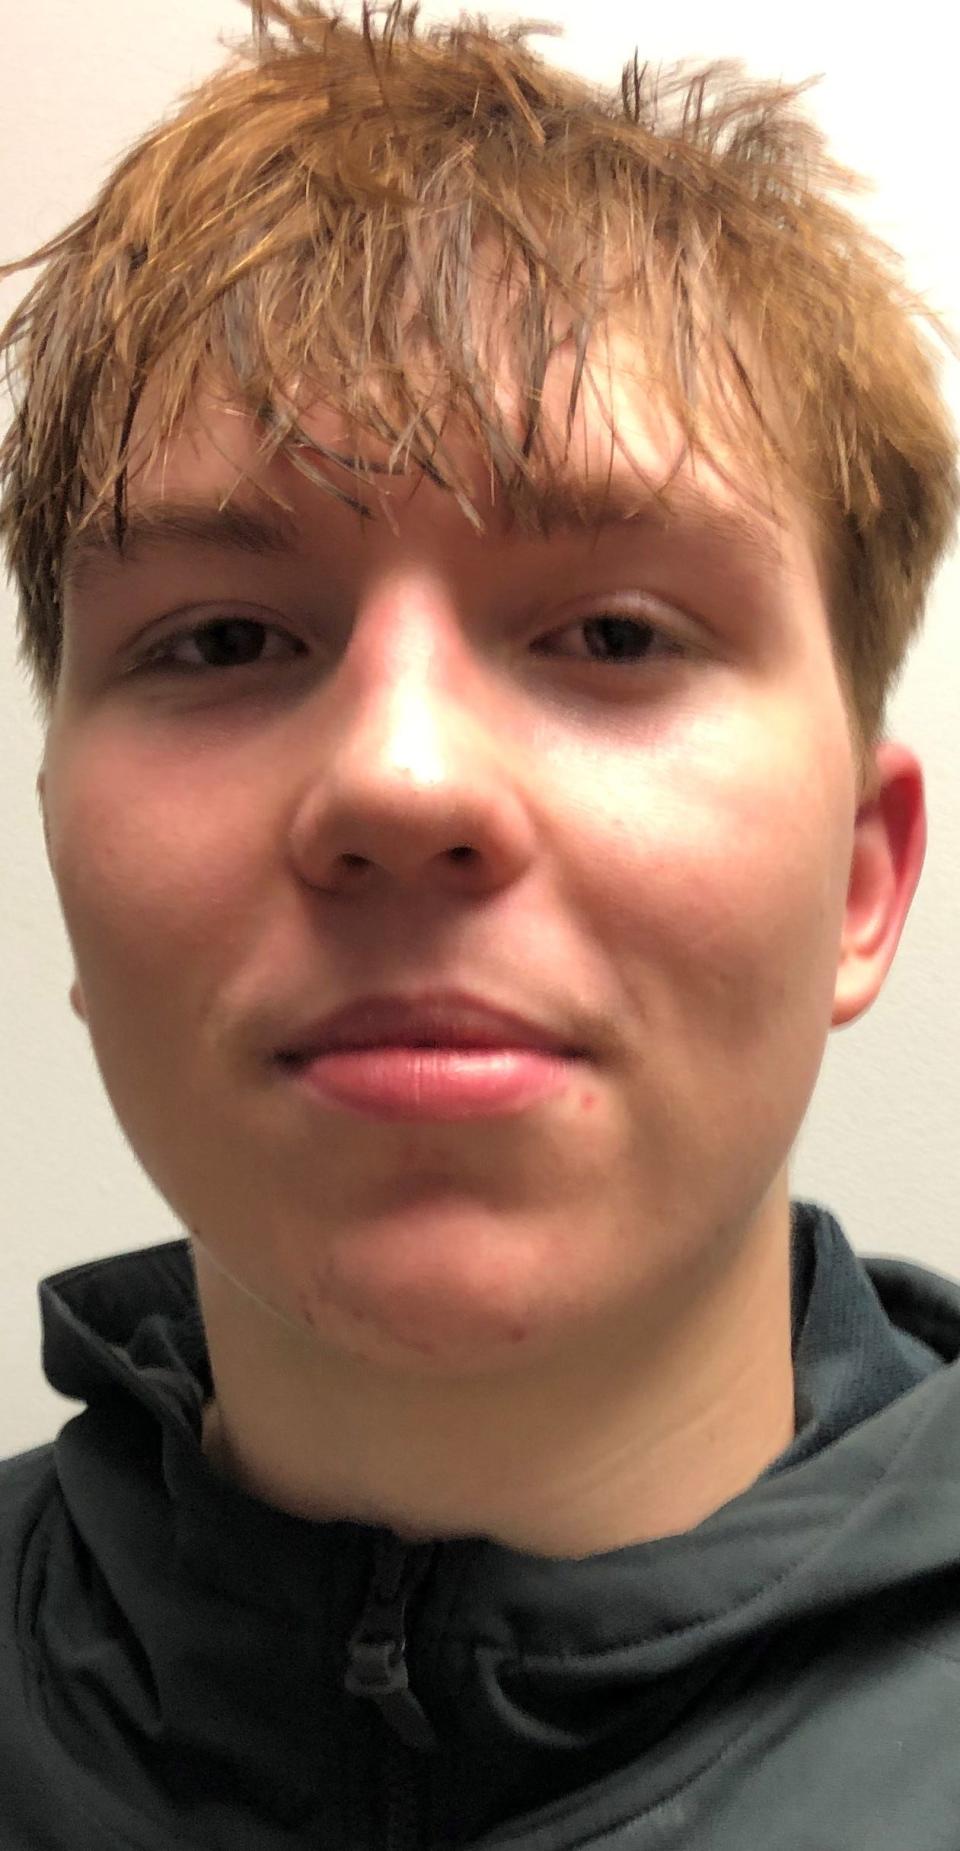 Newark senior Steele Meister went 10 of 13 from the field, scored 22 points, and had eight rebounds and four assists in less than three quarters against Central Crossing on Friday.